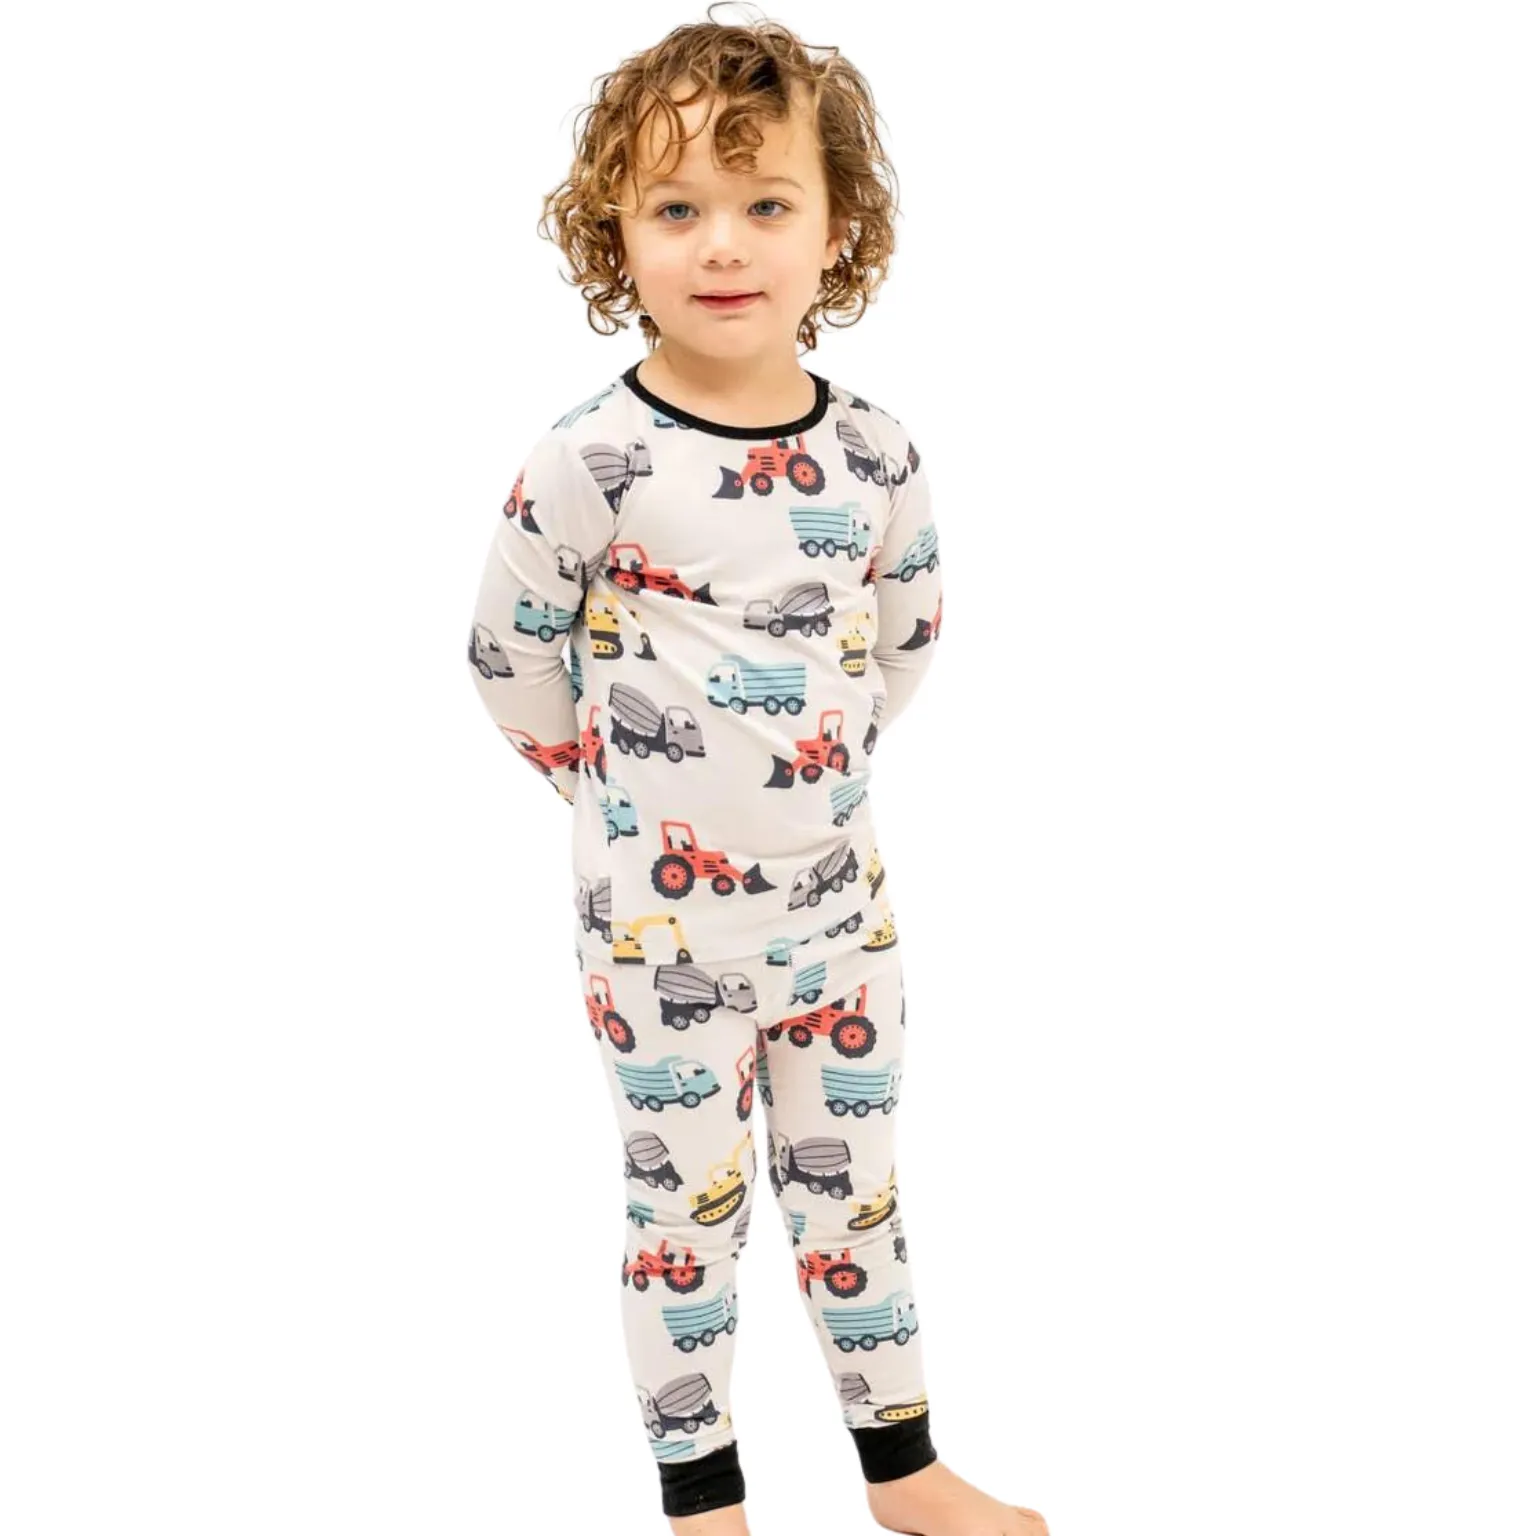 Toddler Pajamas manufacturing with superior quality